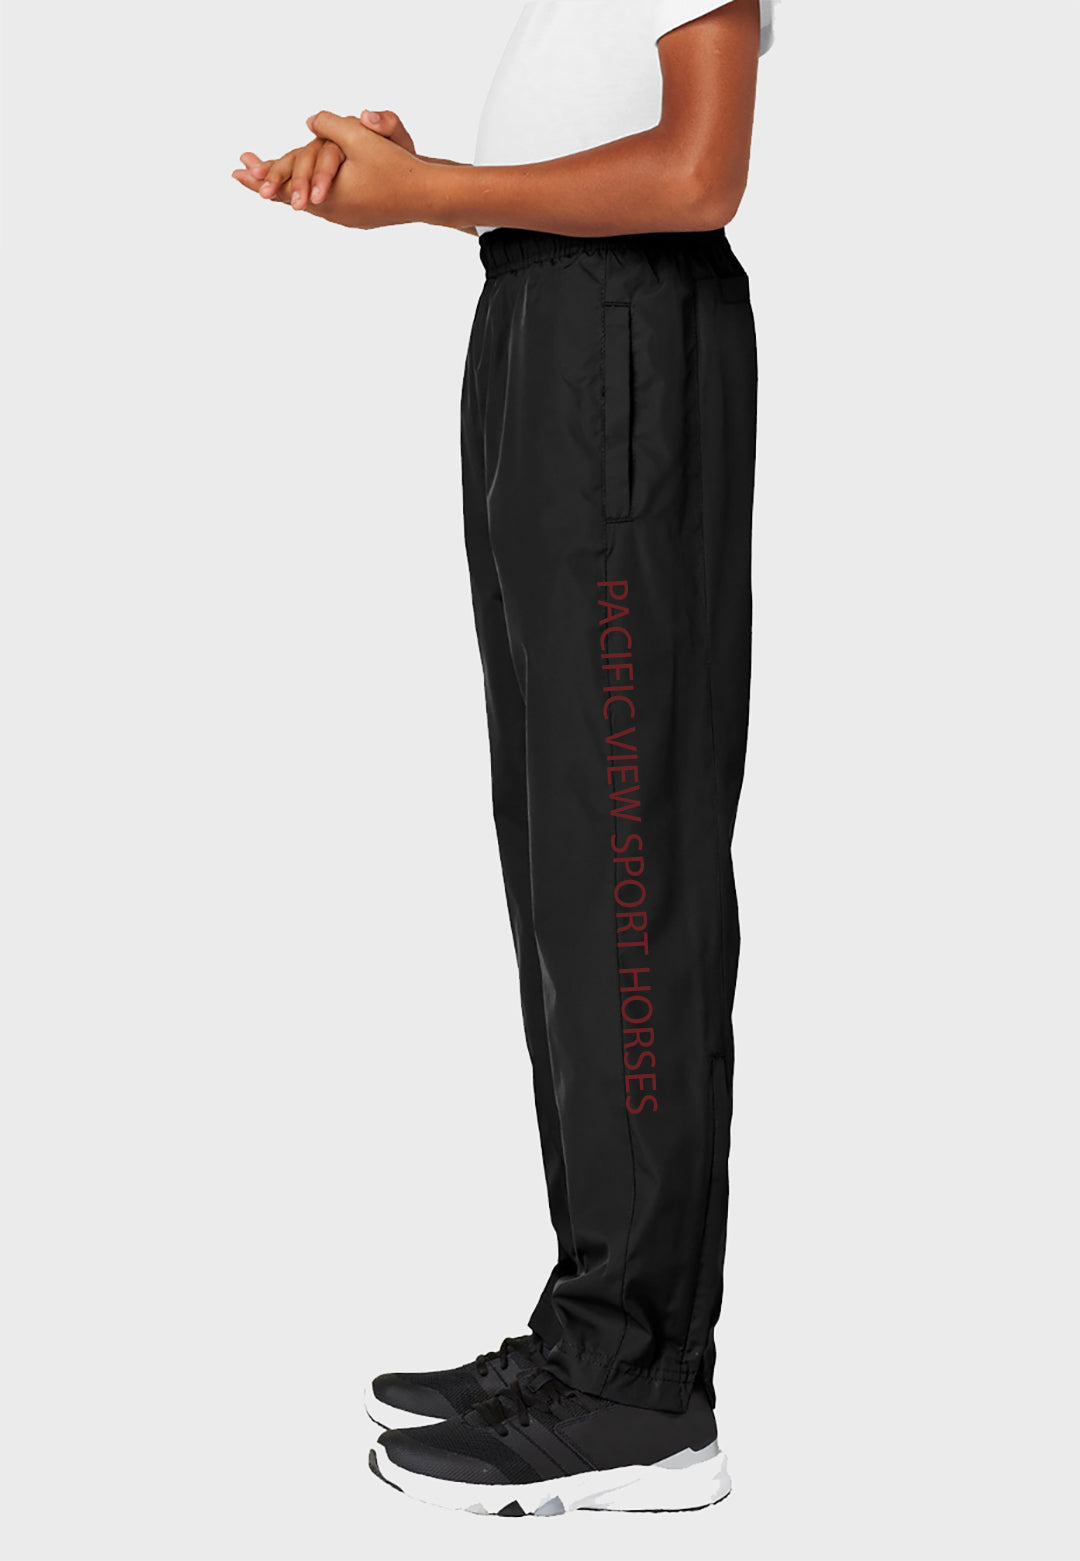 Pacific View Sport Horses Sport-Tek® Black Pull-On Wind Pant - Youth